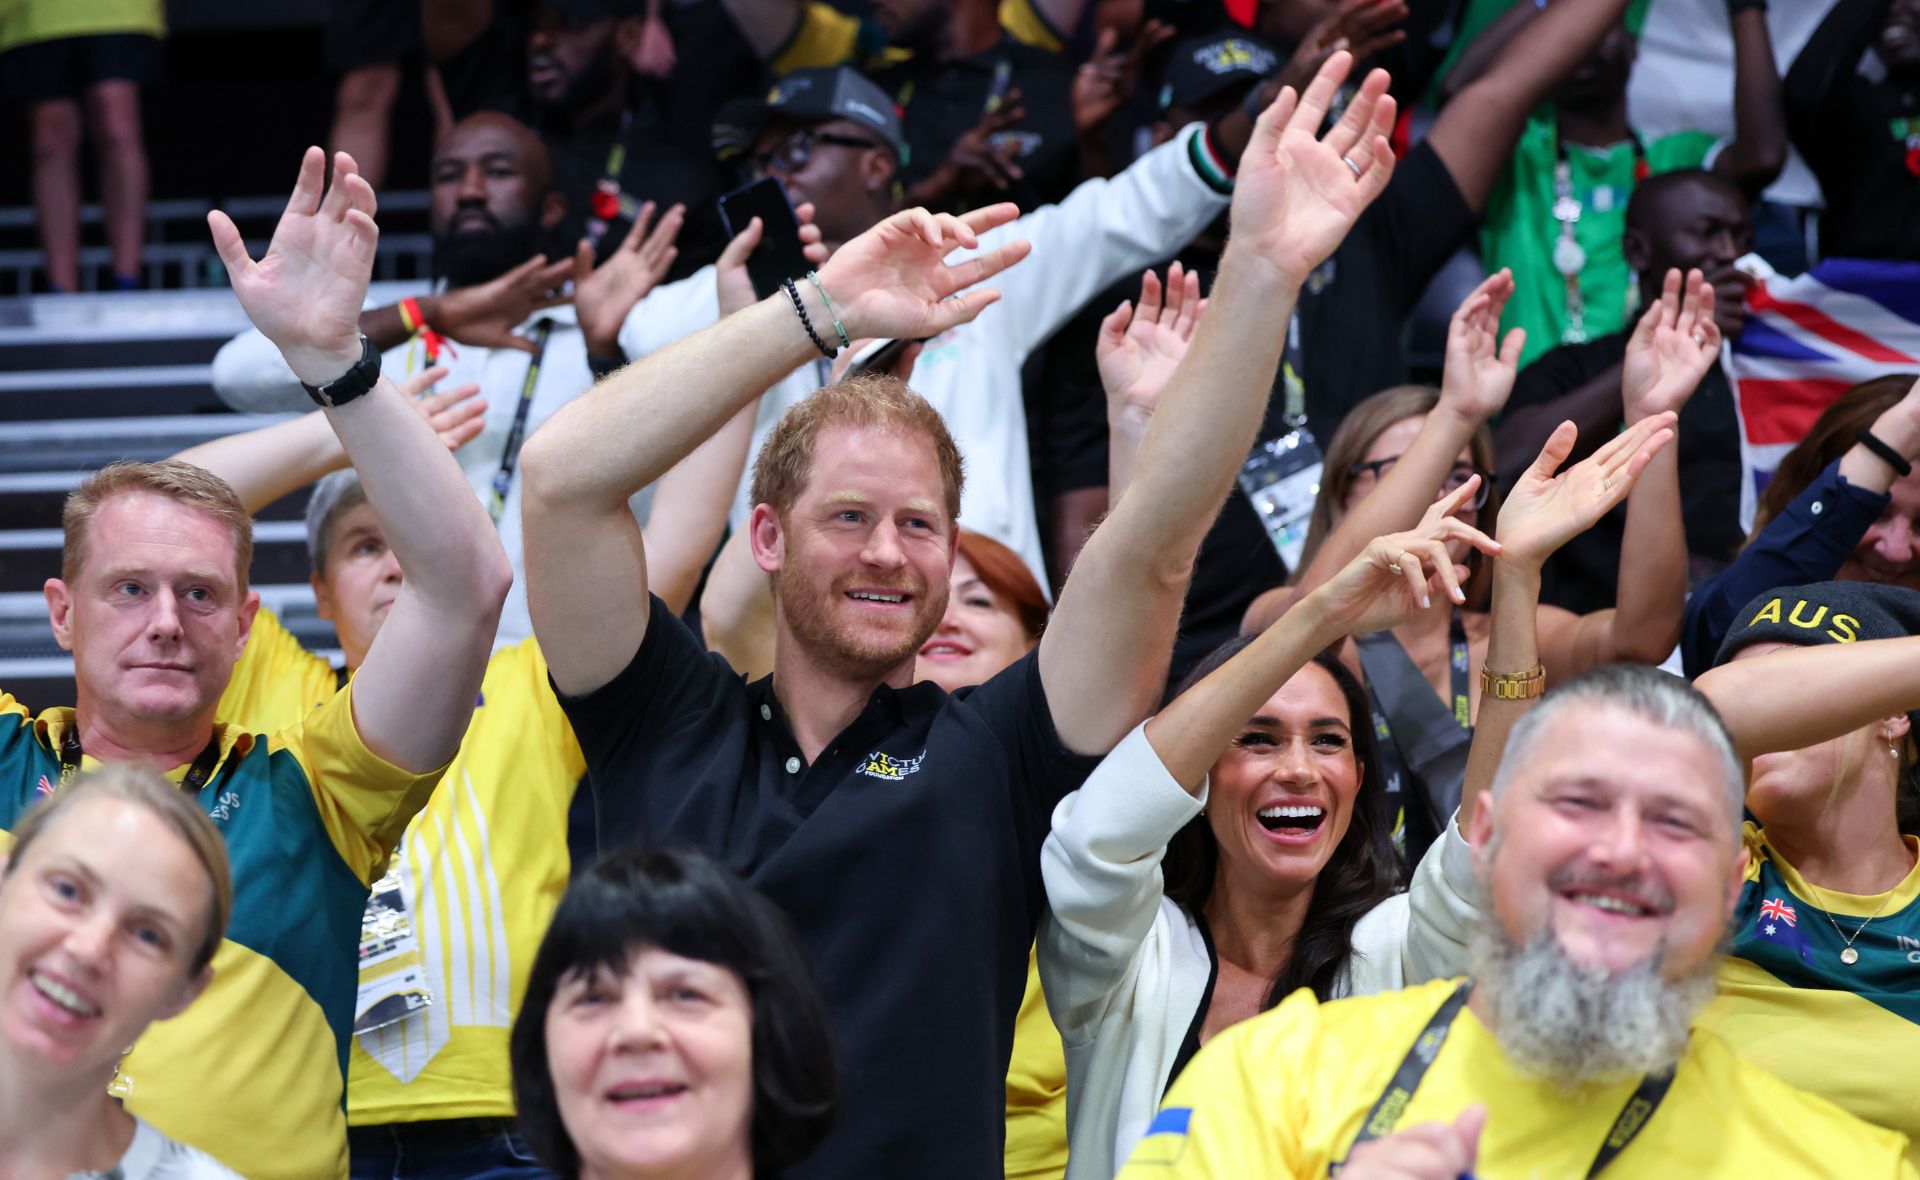 Prince Harry is glowing at the Invictus Games